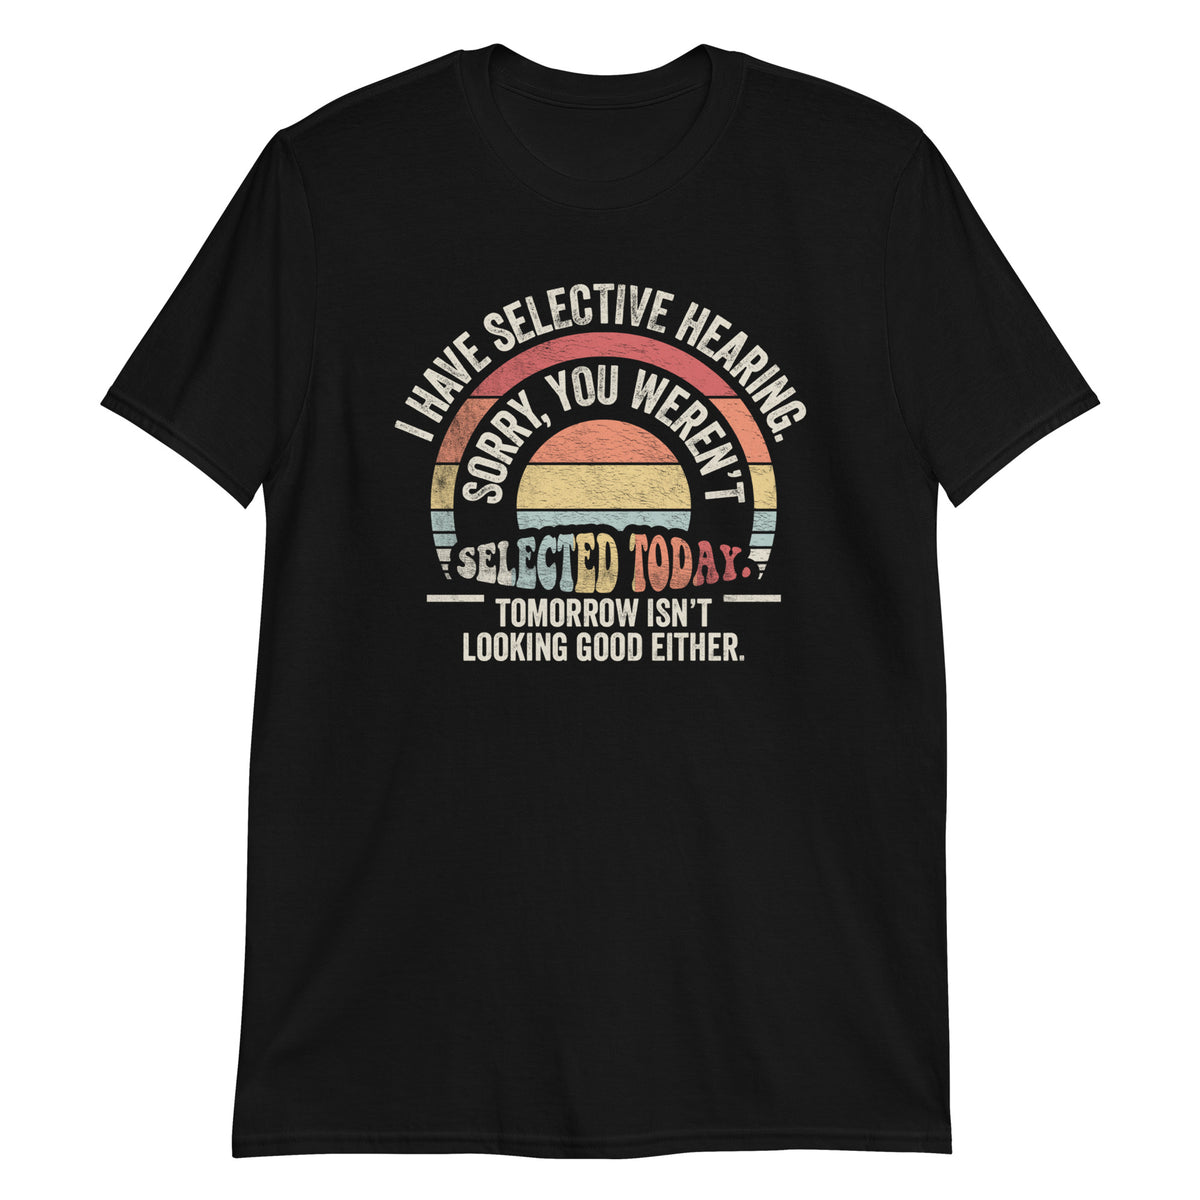 I Have Selective Hearning Sorry You Weren't Selected Today T-Shirt